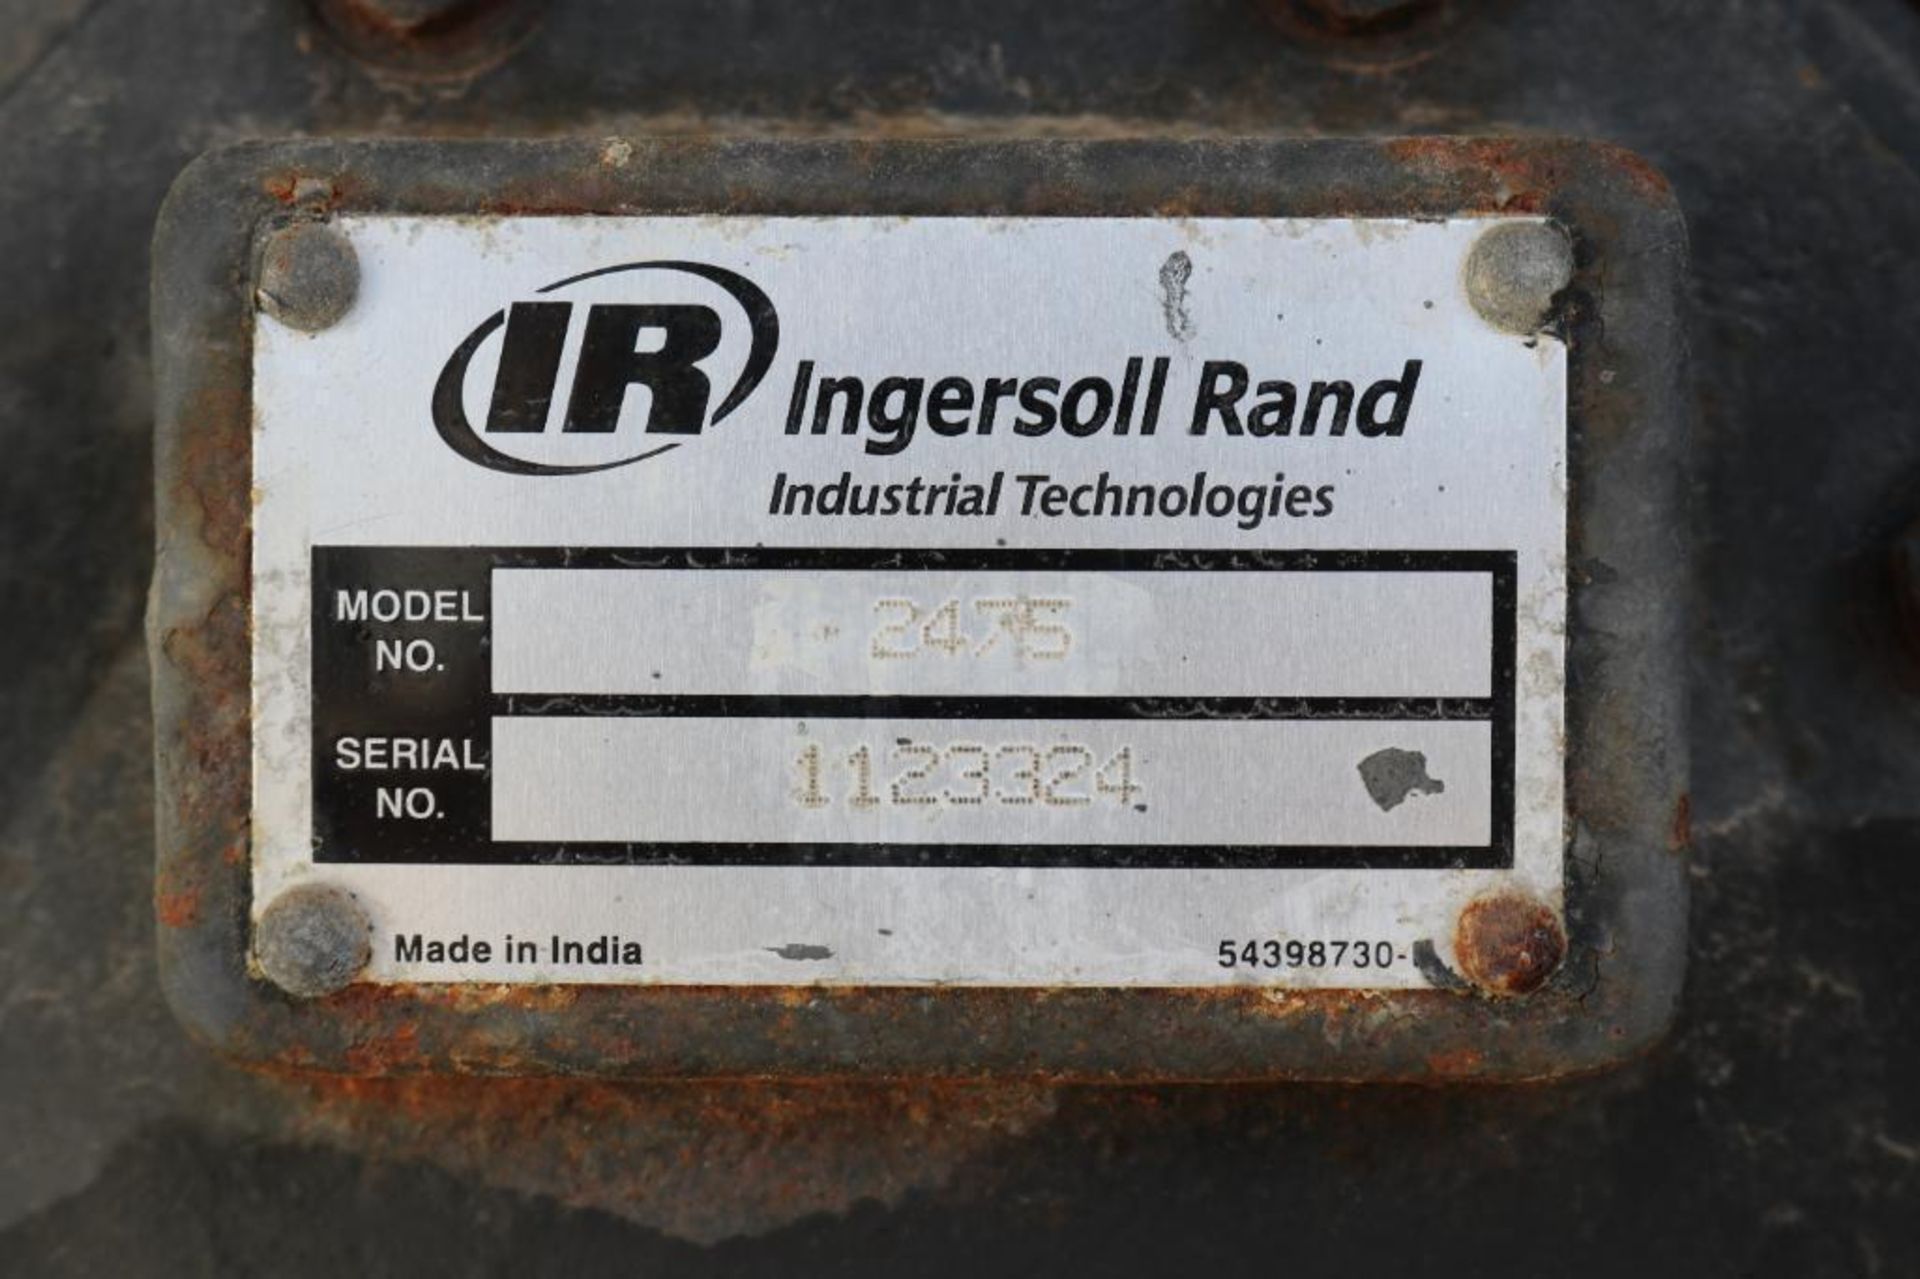 Ingersoll Rand Model 2475.5-P Two Stage Cast Iron Air Compressor Serial Number: CBV554476 230V 60Hz - Image 2 of 9